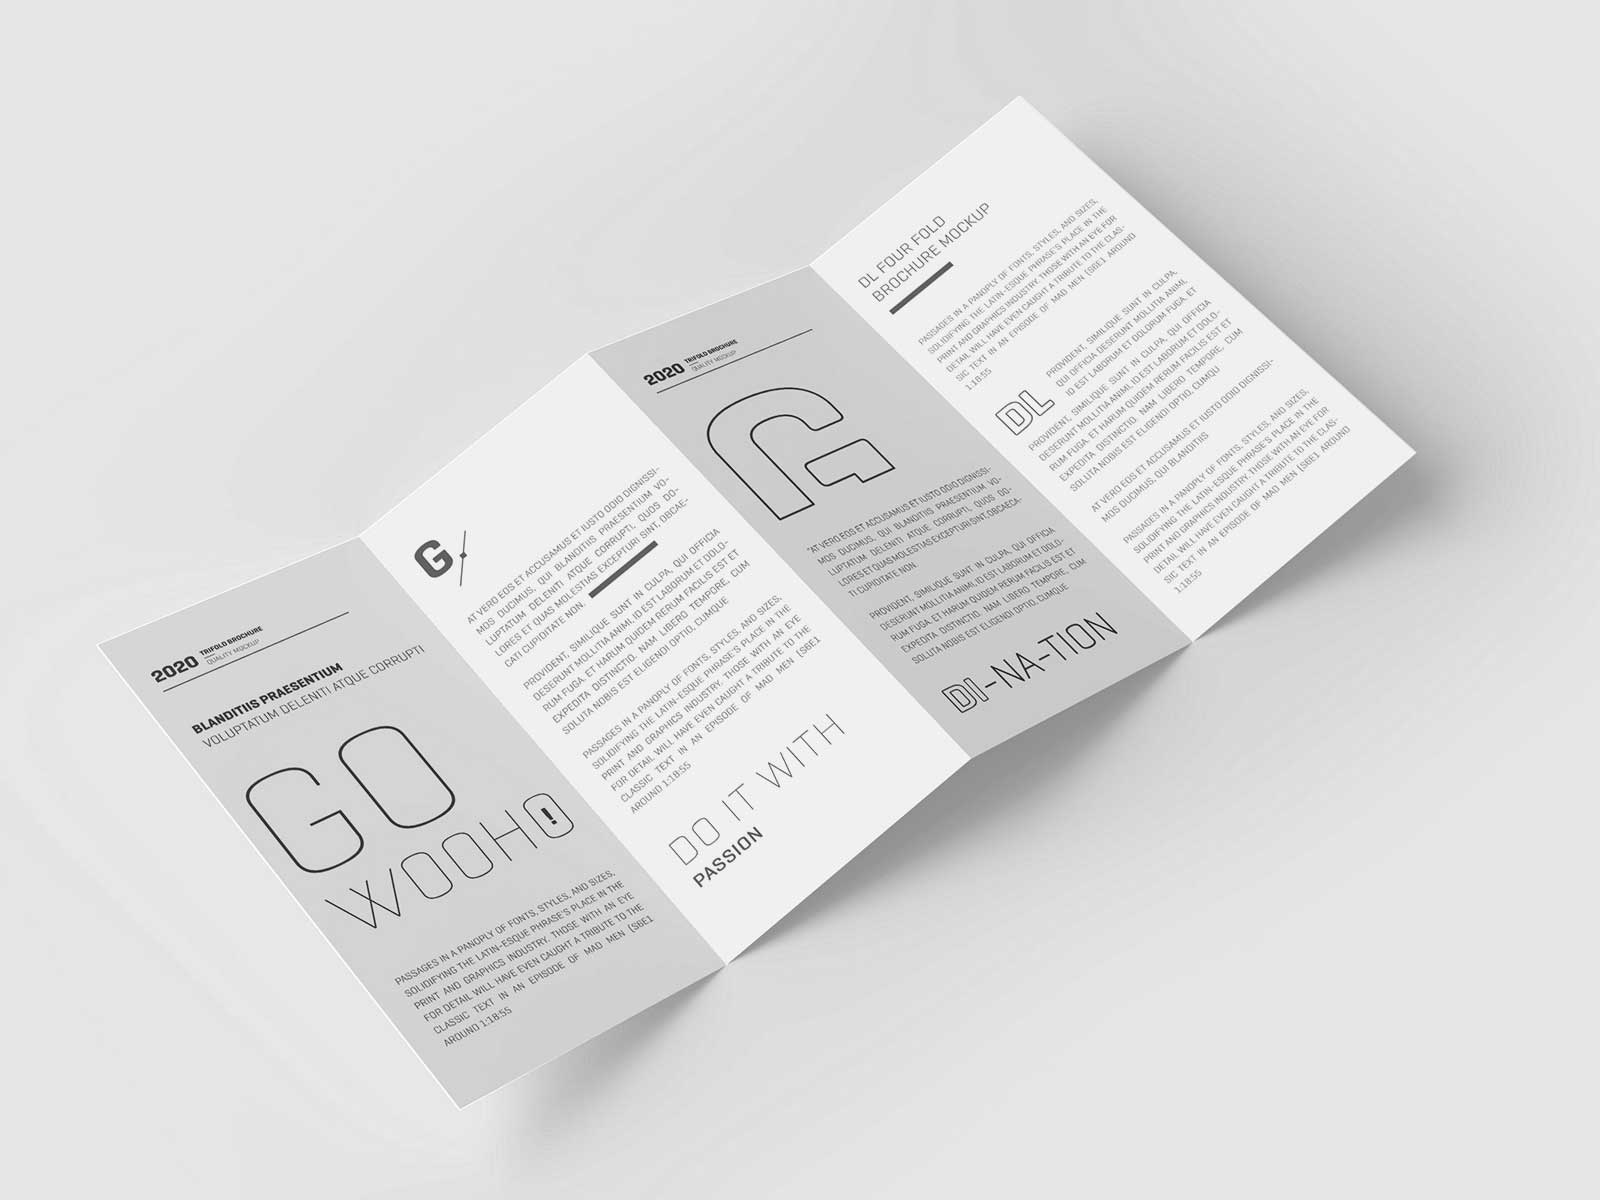 DL 4 Fold Brochure Free Mockups: Unfold Your Creativity in Style!